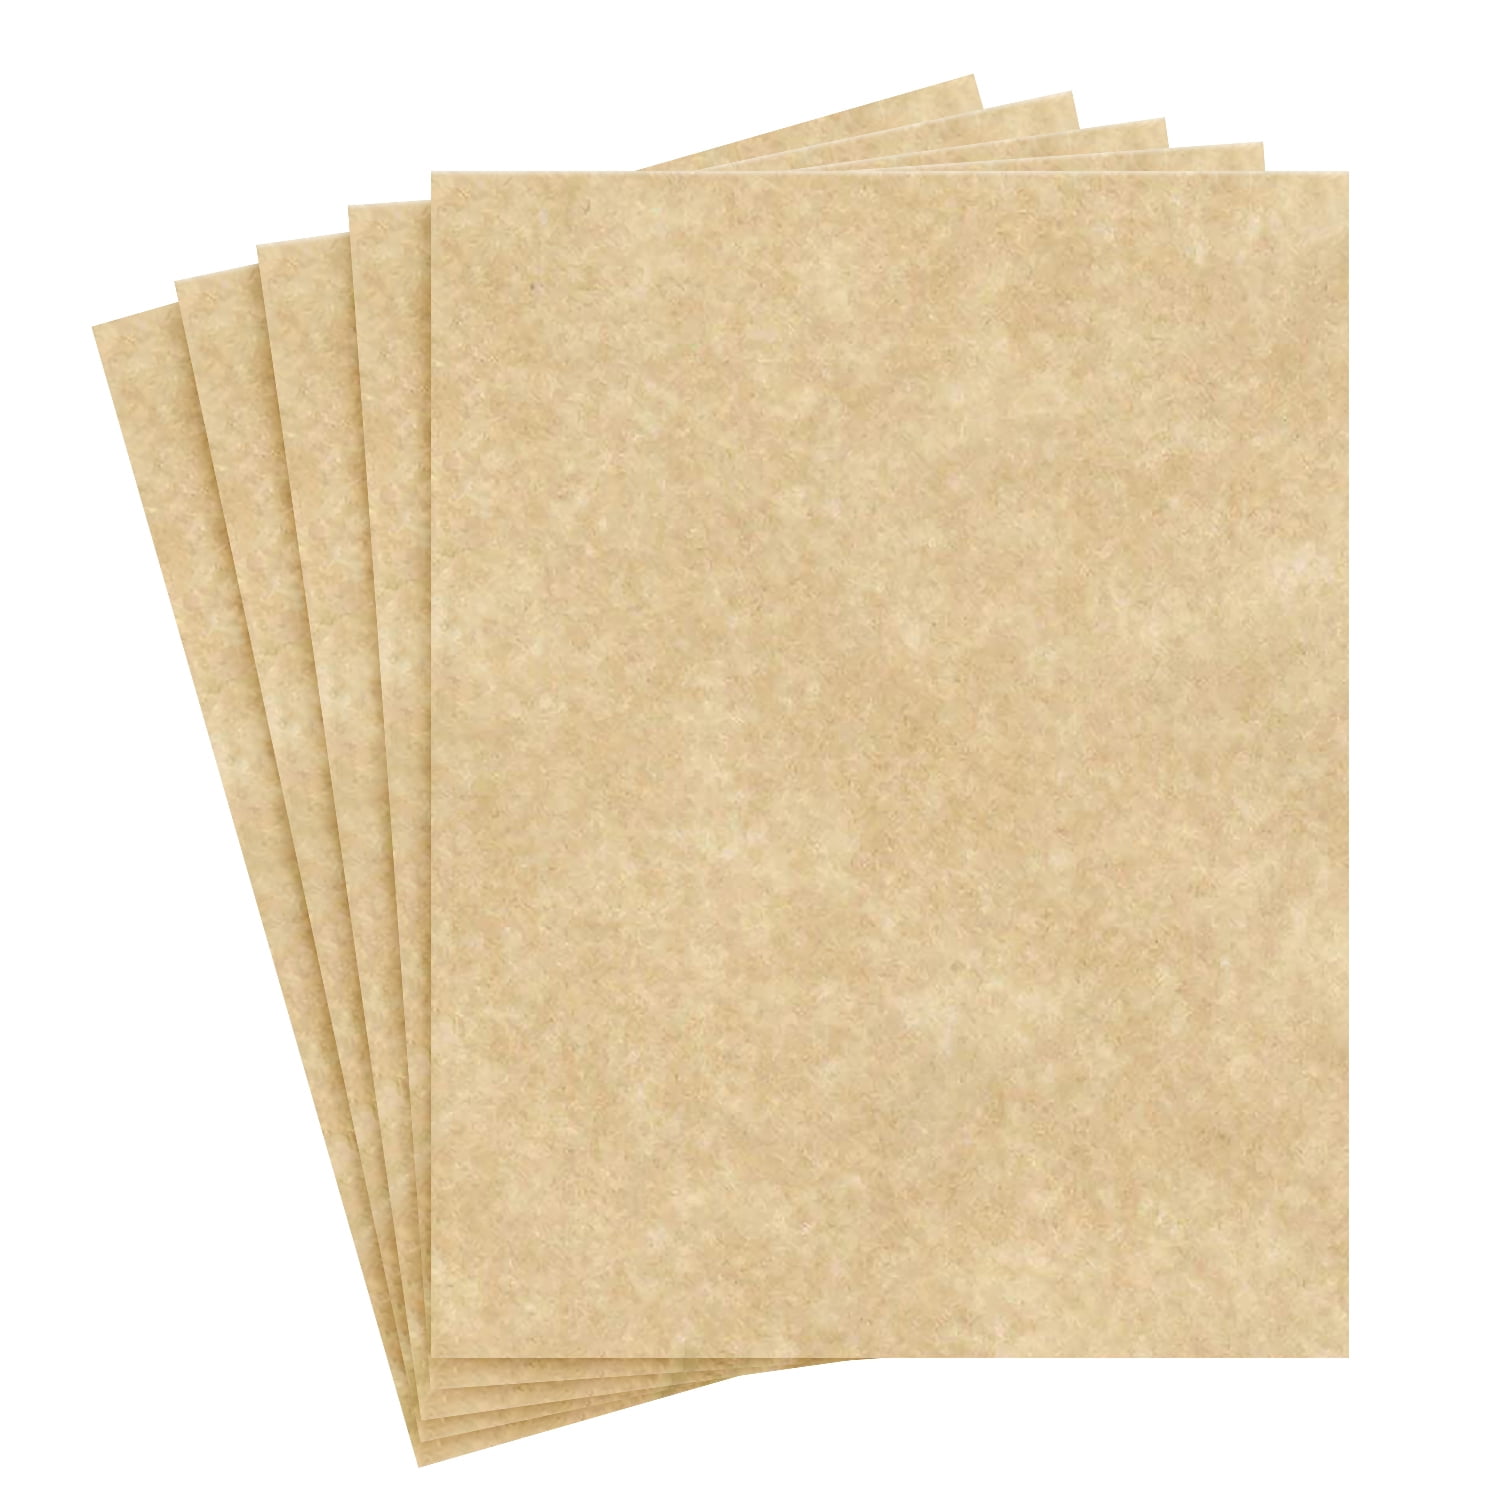 Parchment Paper Text 24lb, Size 8.5 x 11 Inches, 50 Sheets per Pack (Aged)